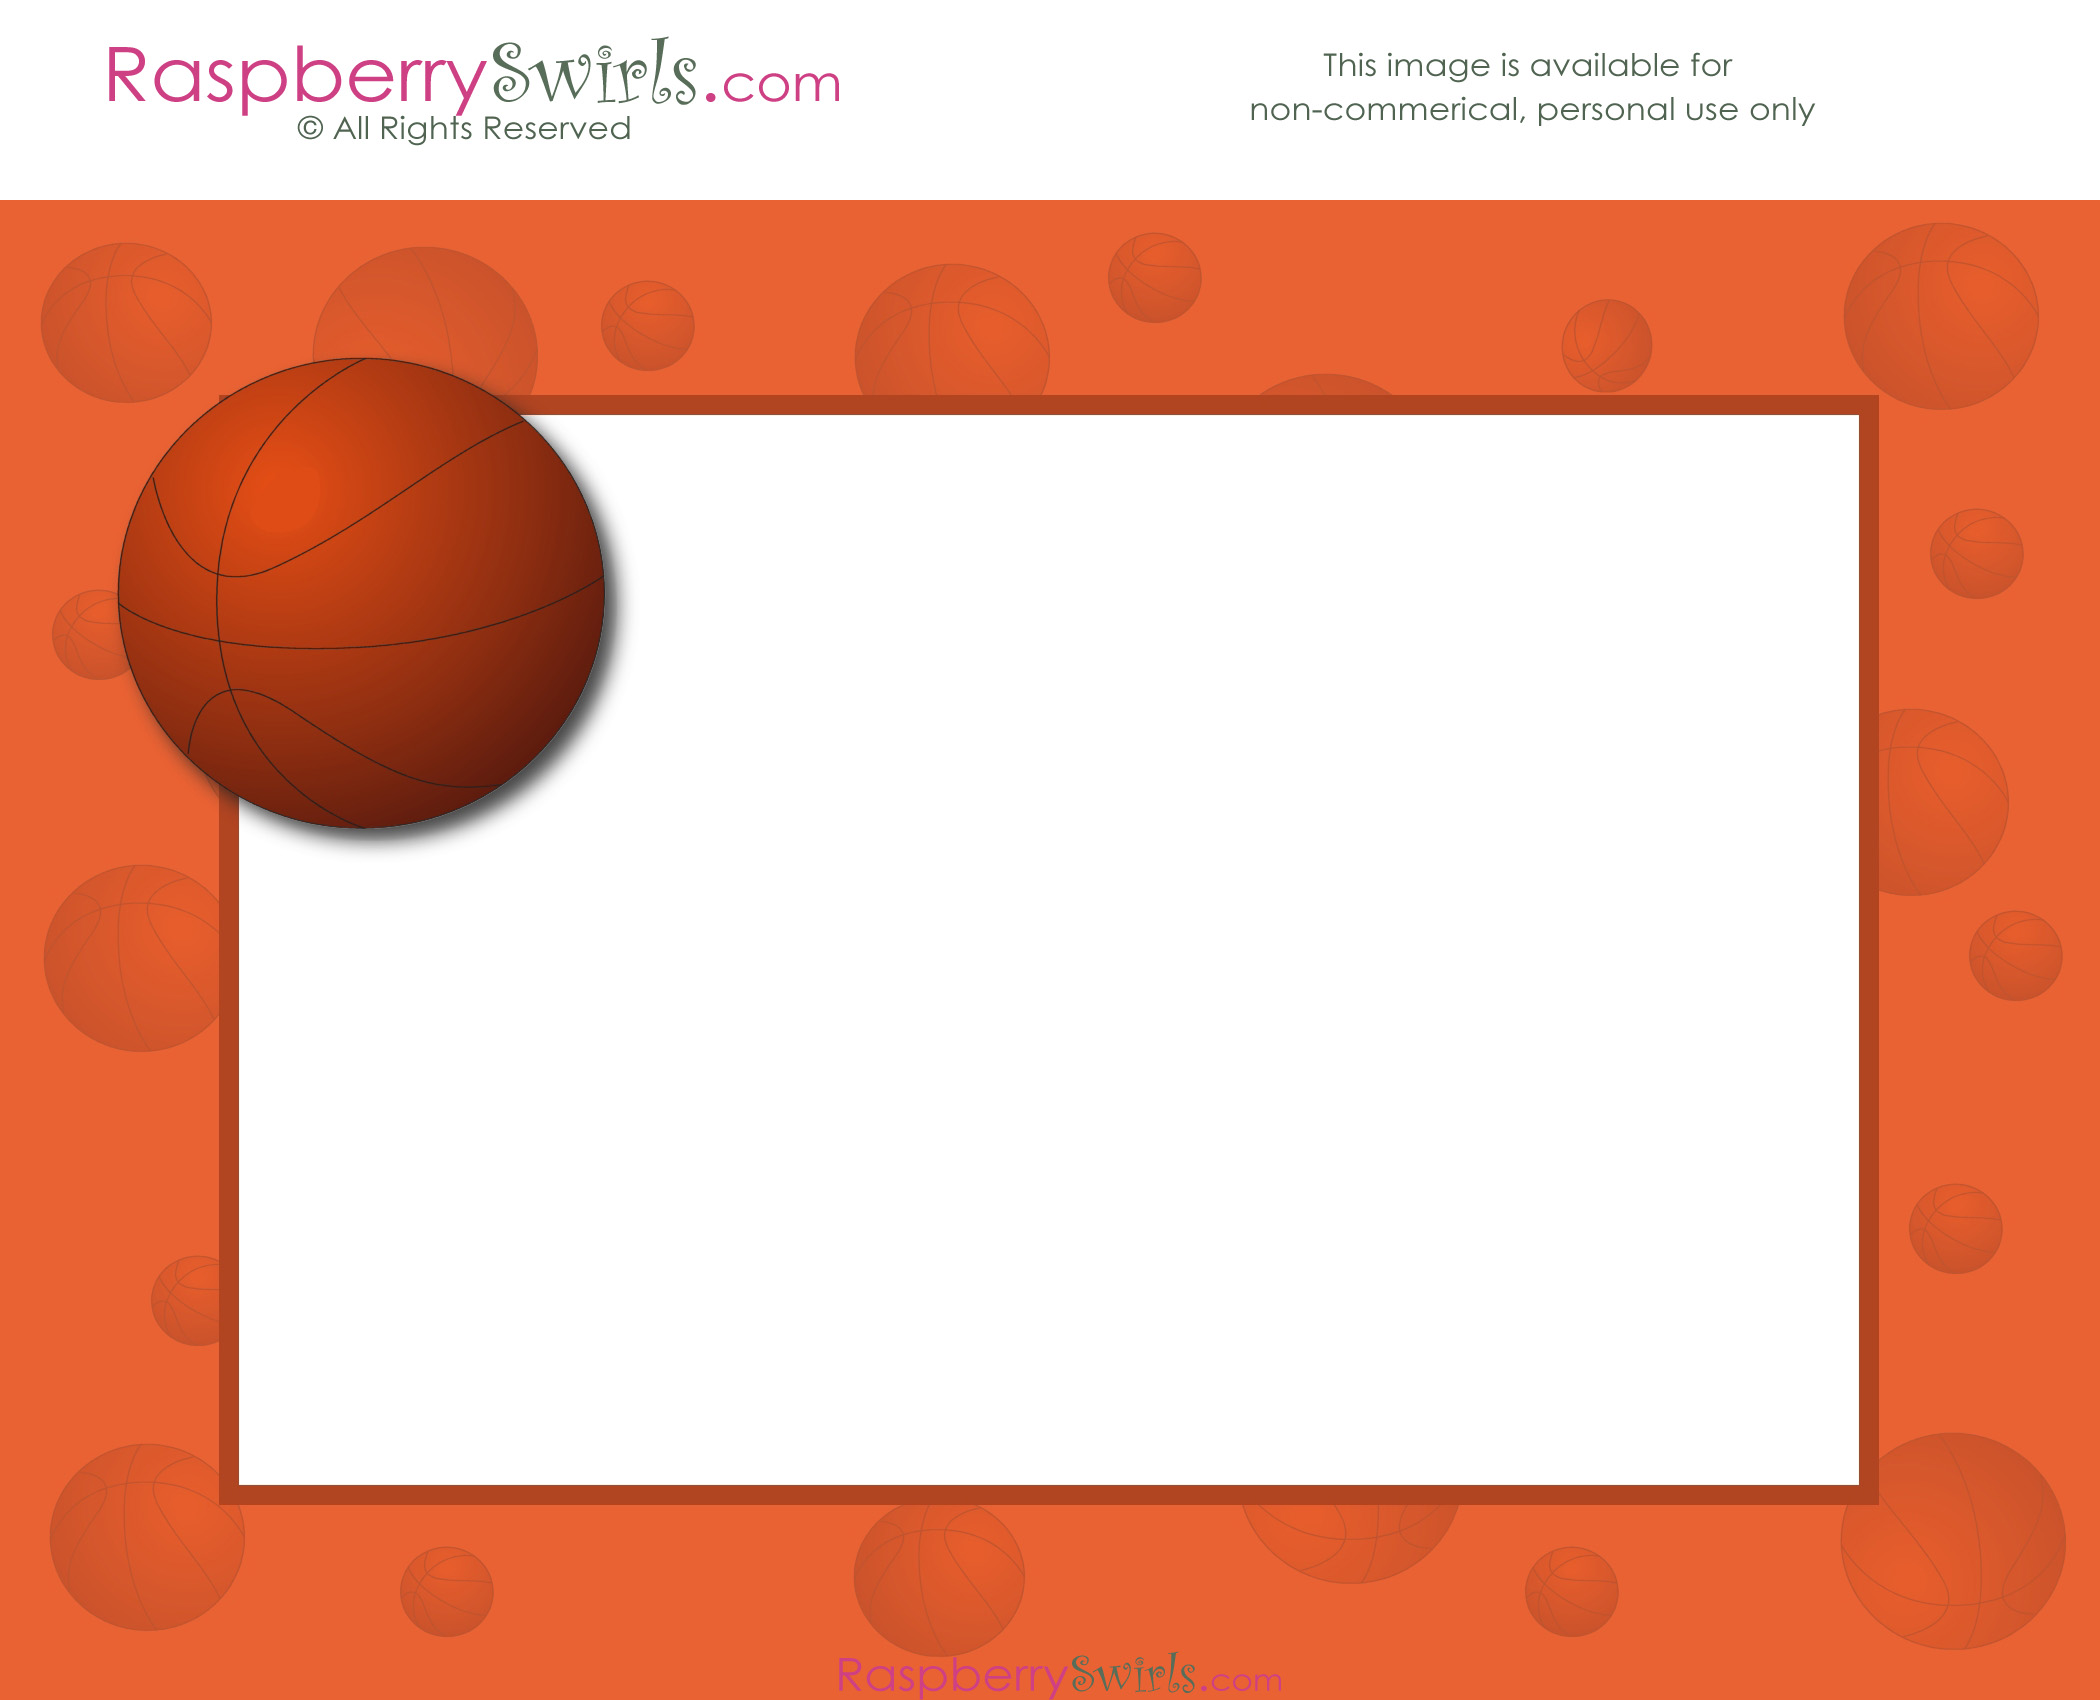 Free Basketball Ii Printable Candy Wrappers Invitations And More Raspberry Swirls